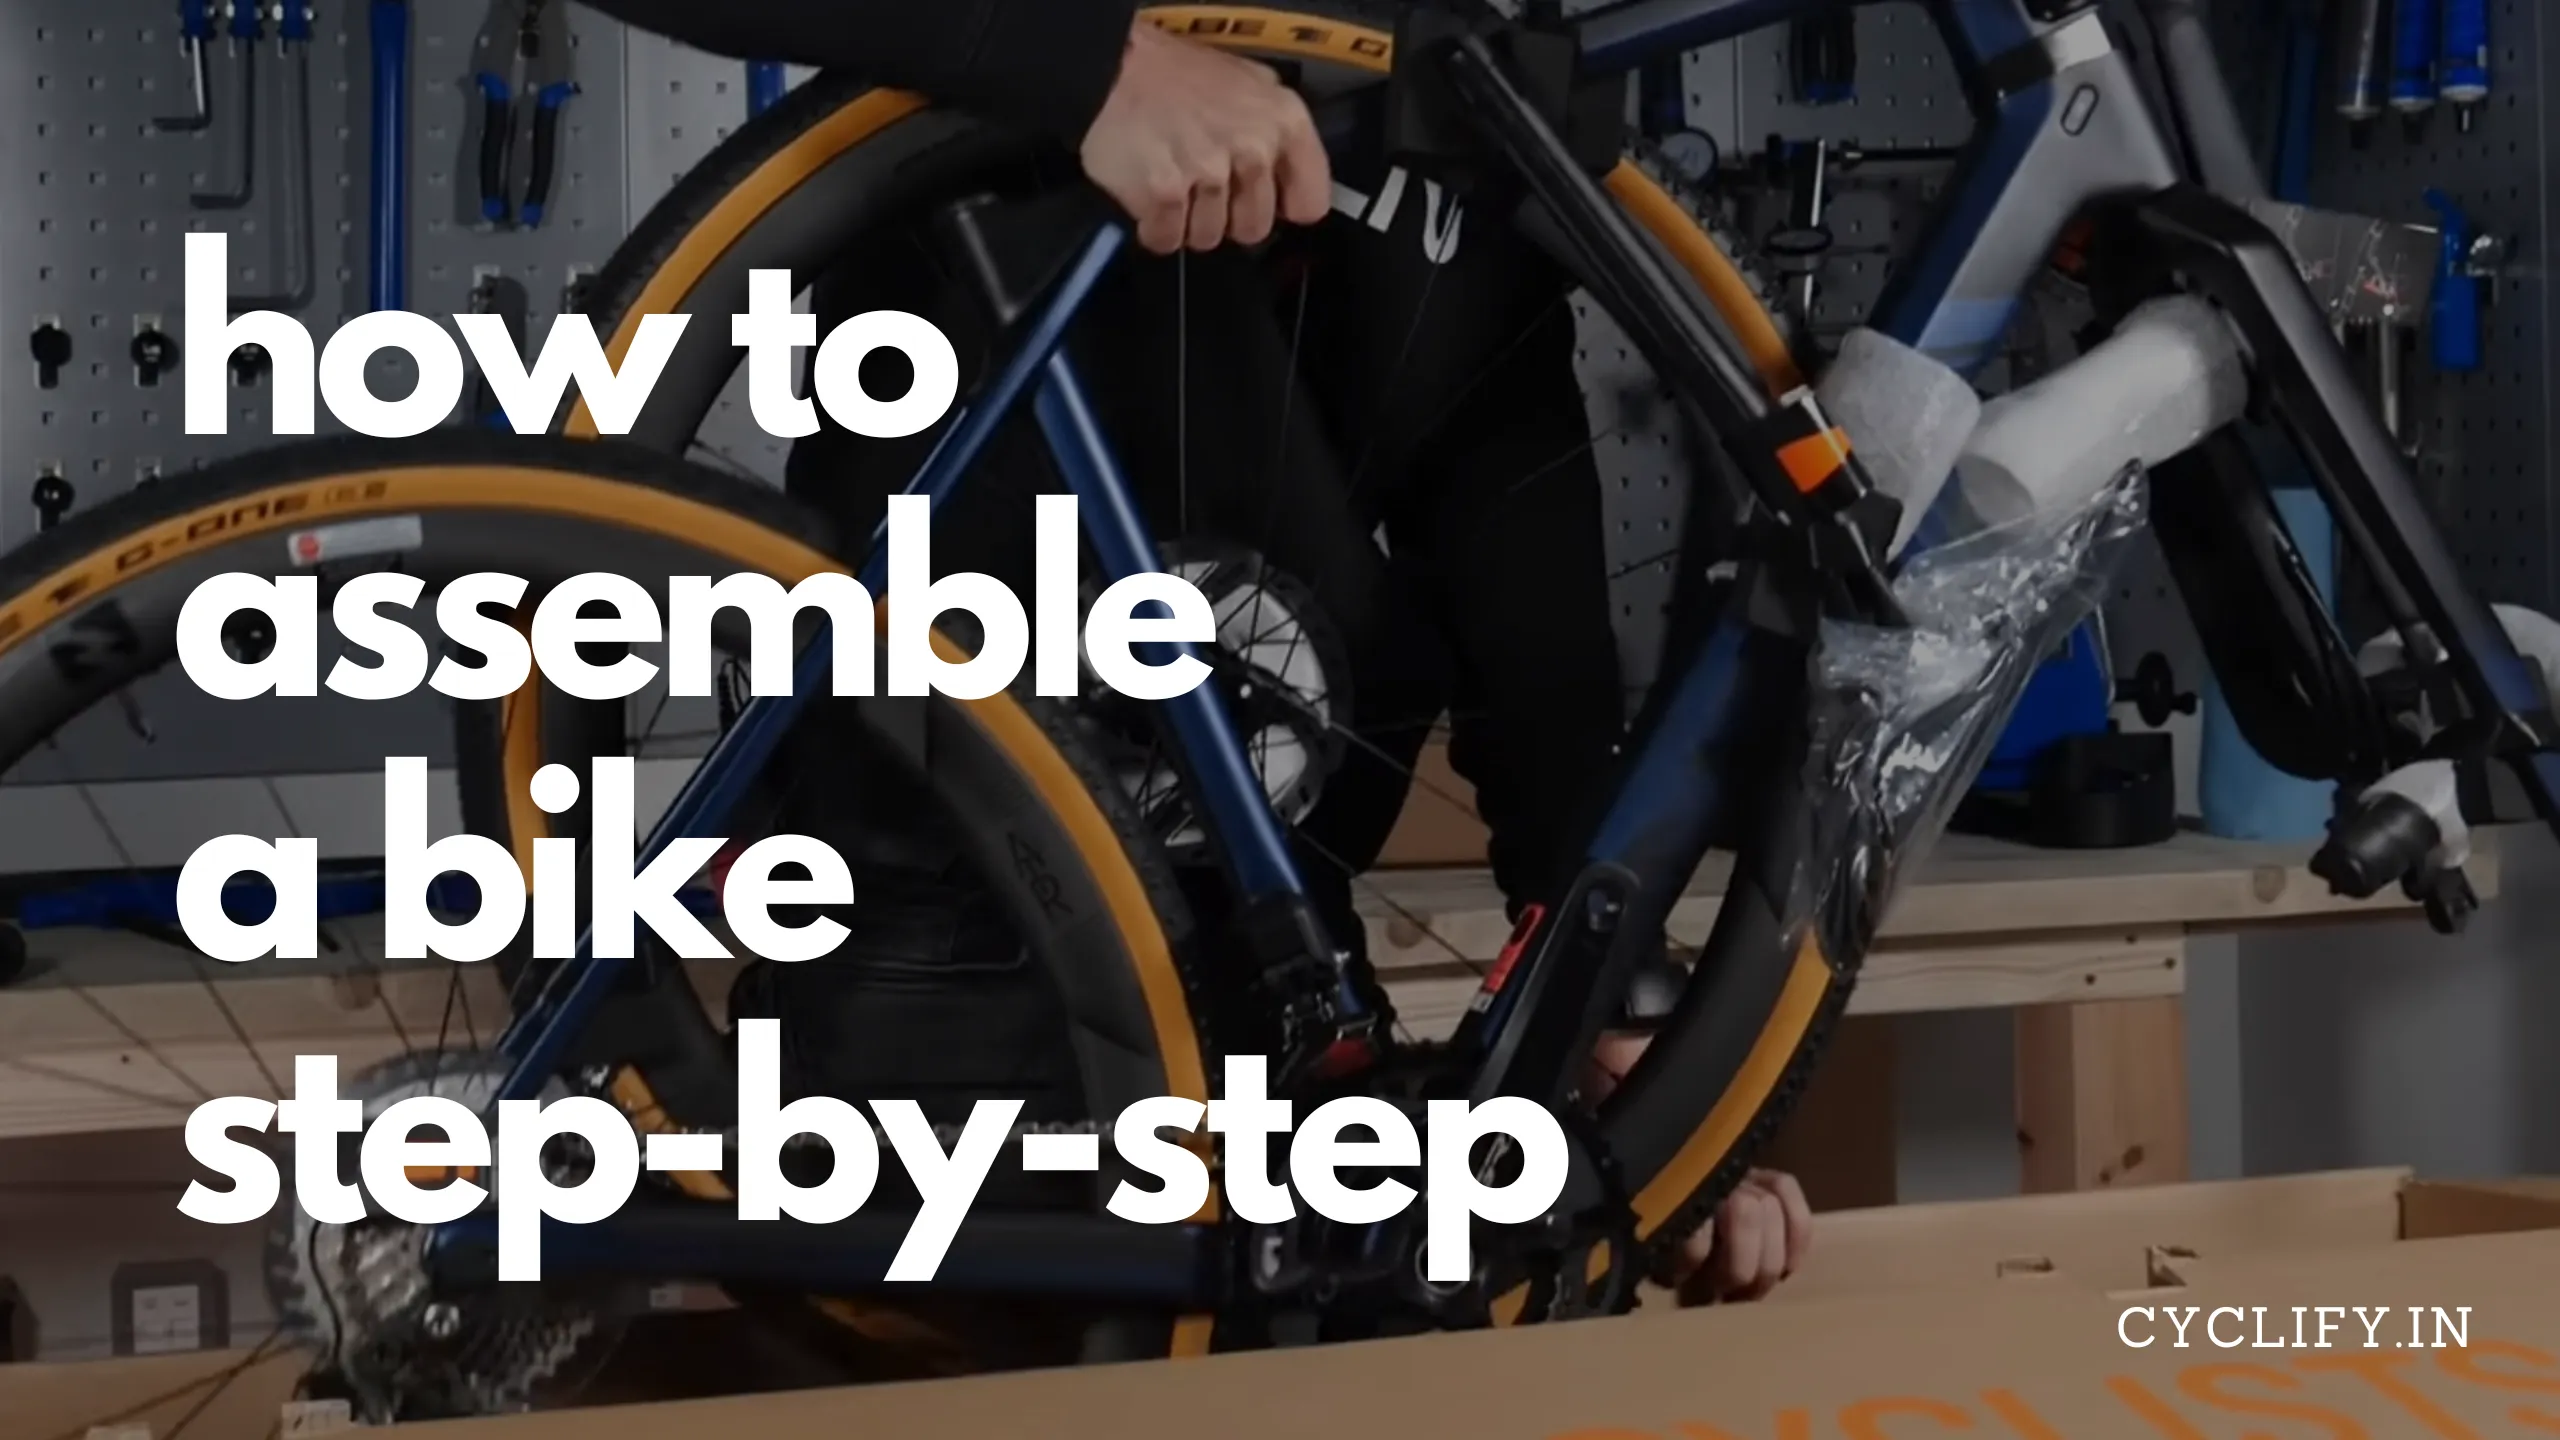 how to assemble a bike: unboxing brand new bike for assembly process